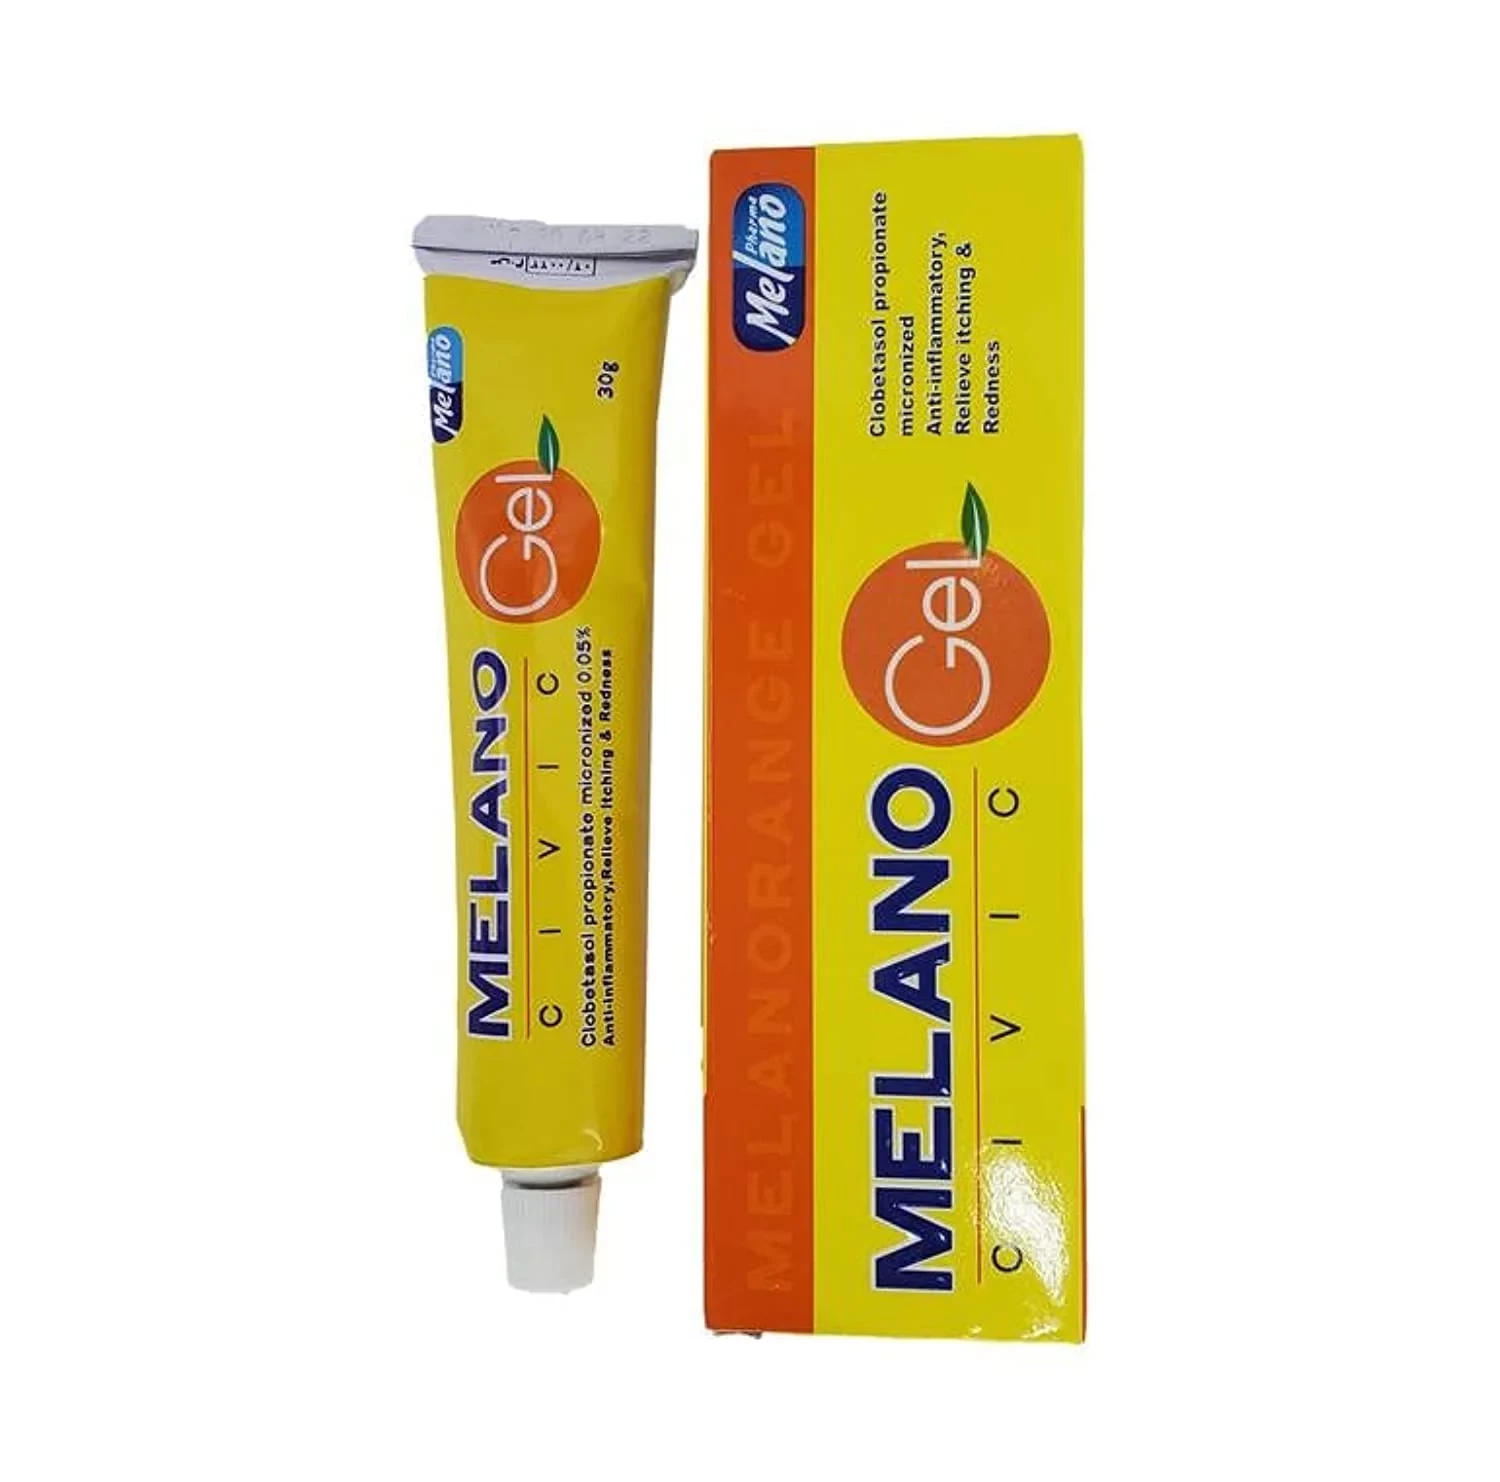 Melano Civic Gel For Anti-Inflammatory, Relieve Itching & Redness 30g